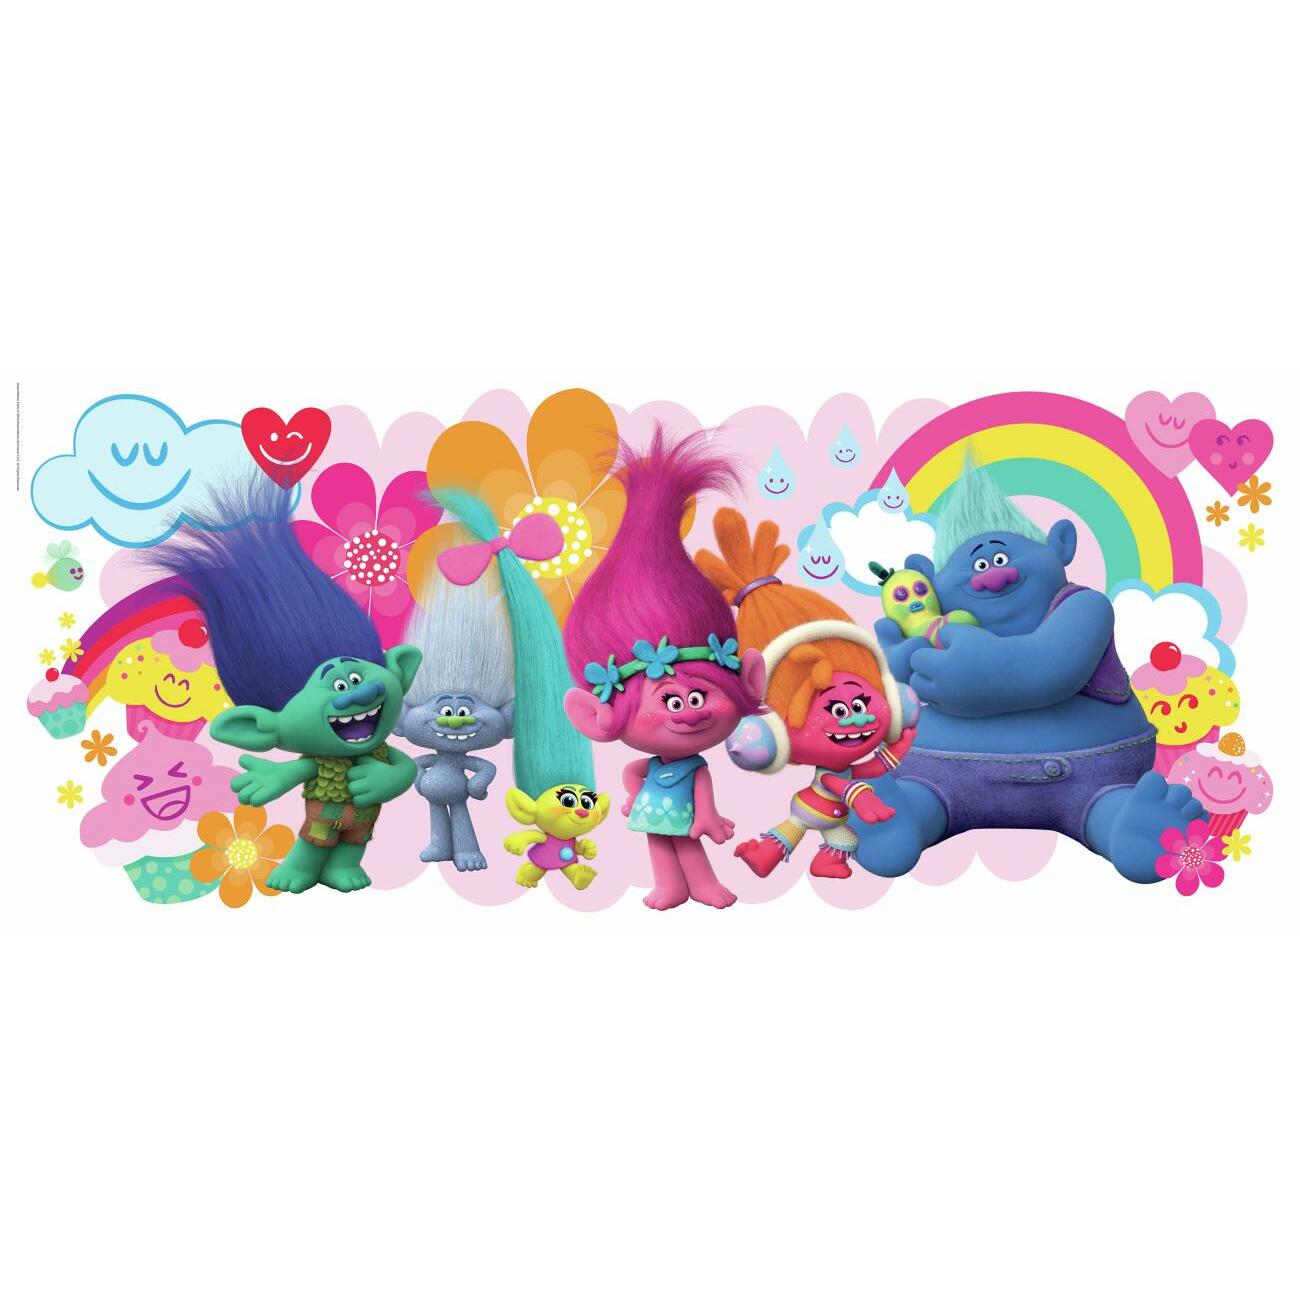 Trolls Movie Giant Wall Graphic Wall Decals RoomMates   